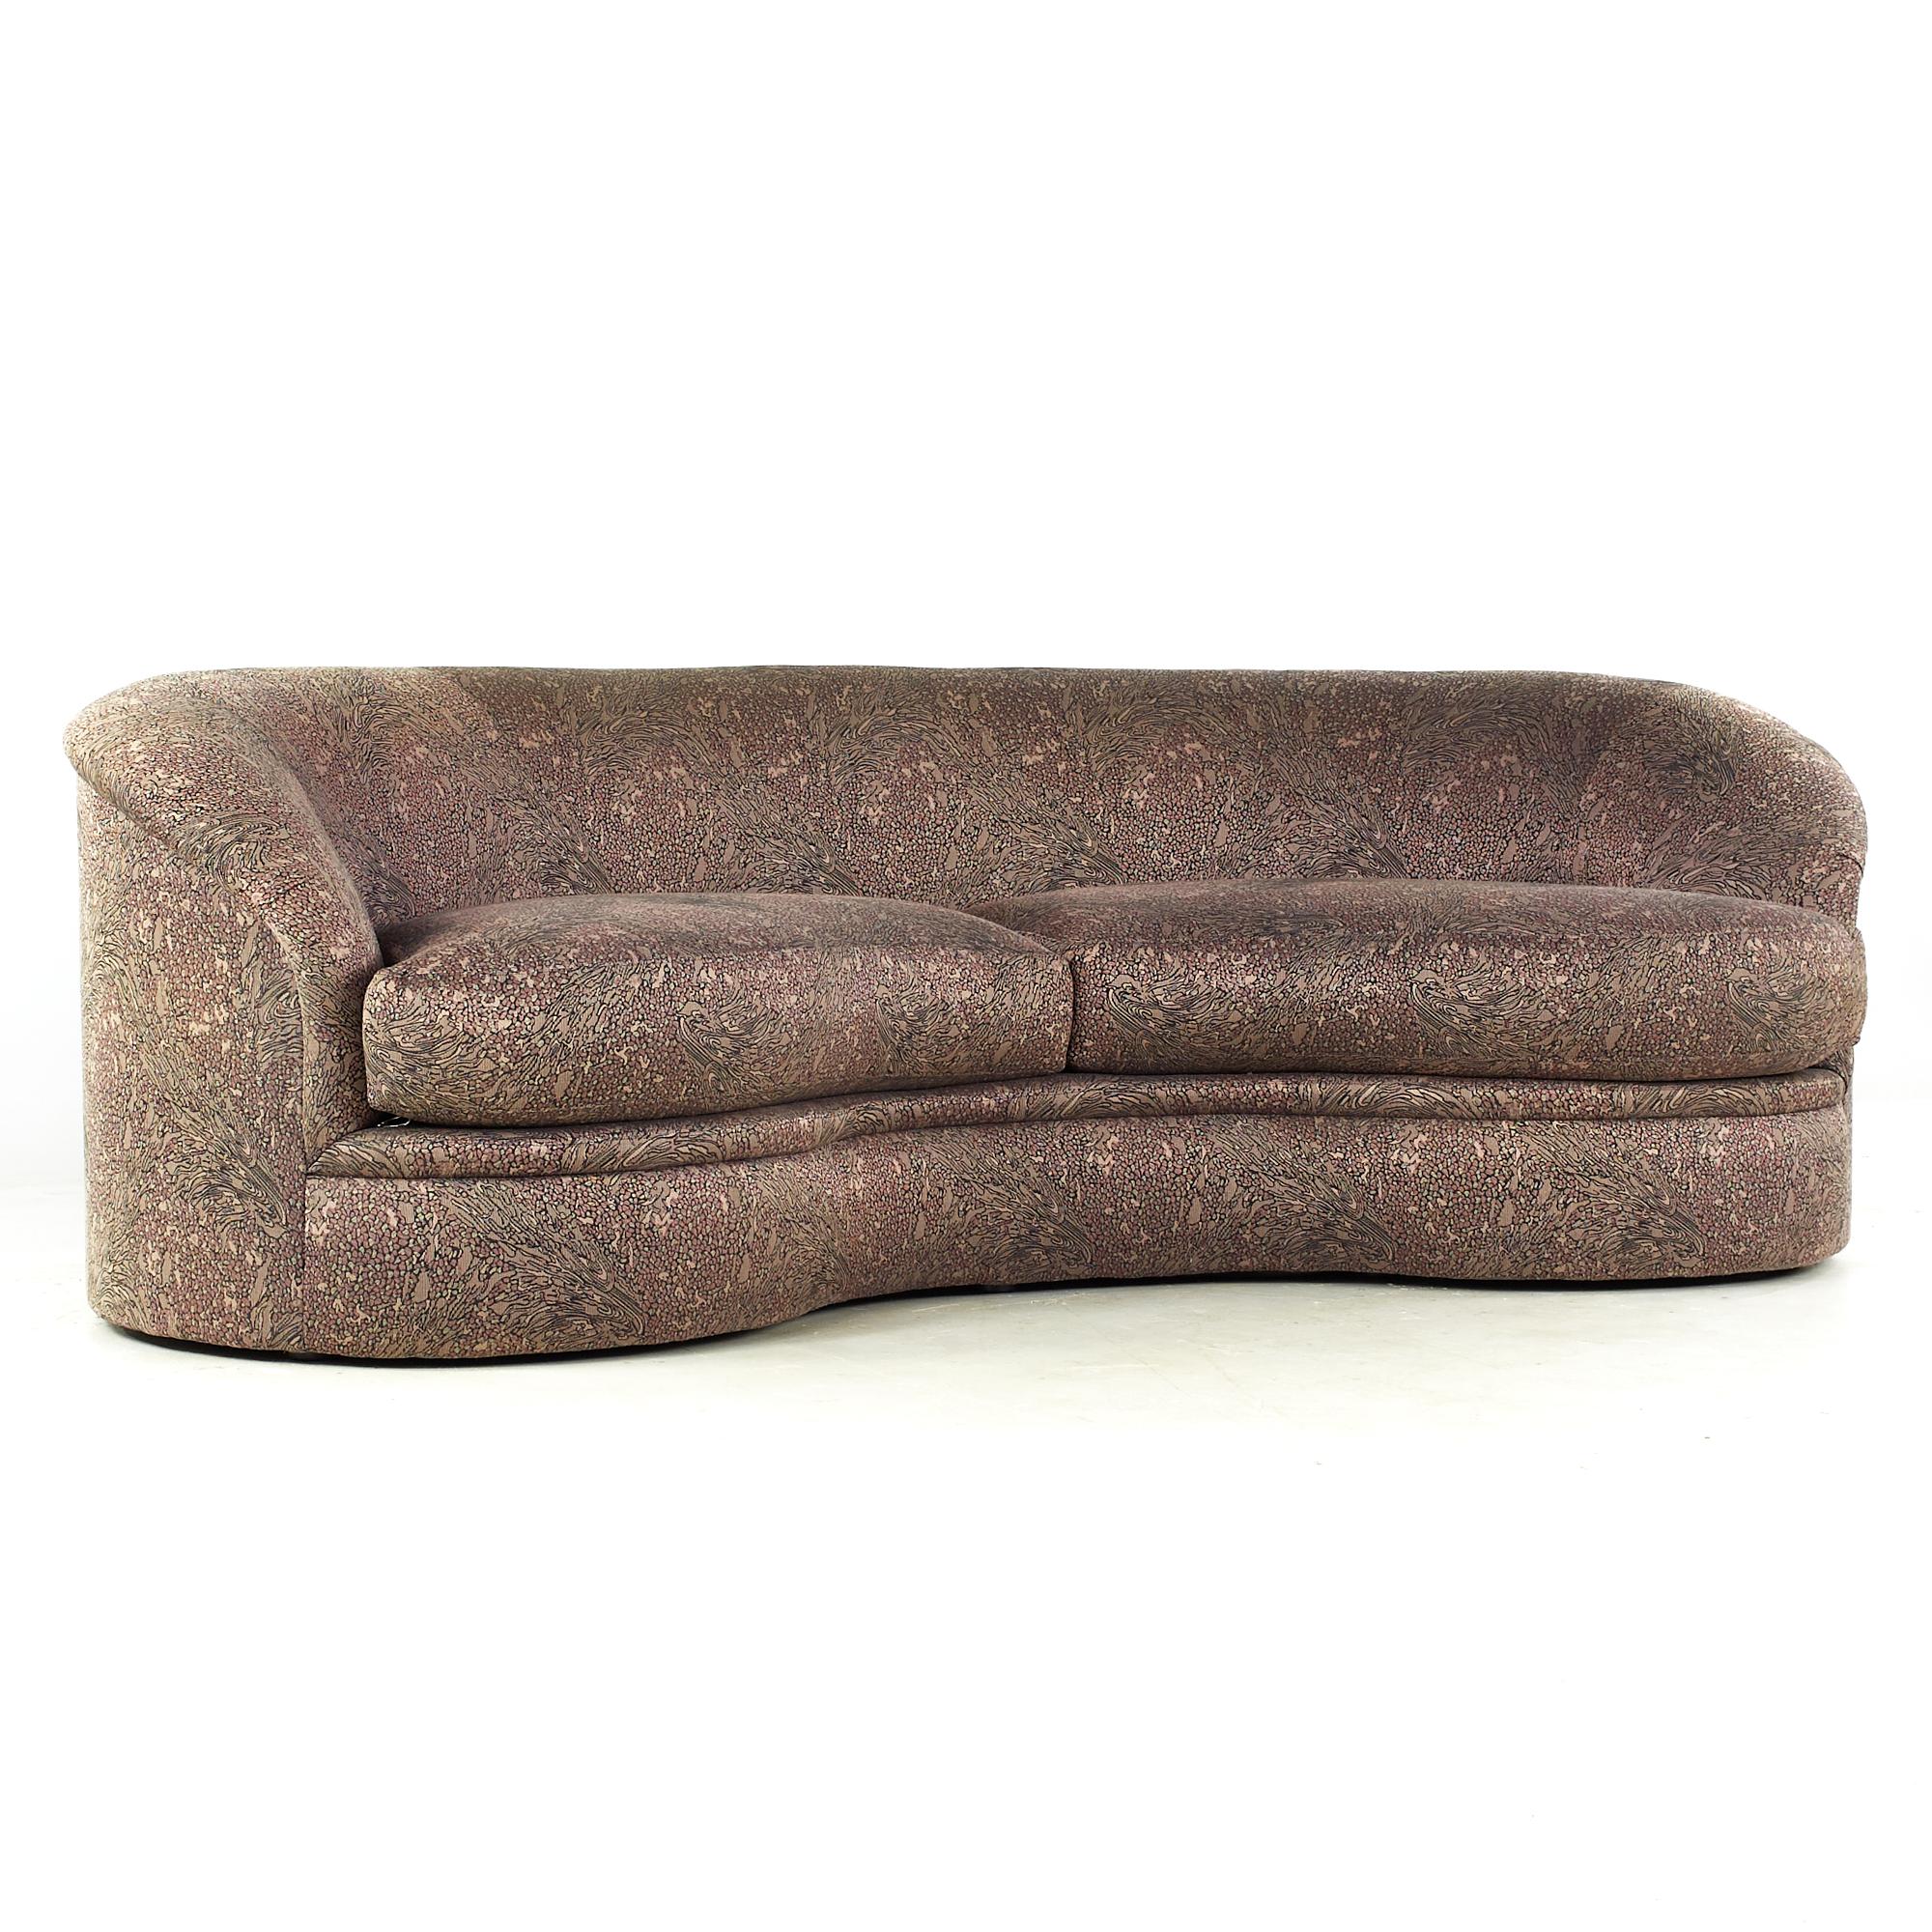 Vladimir Kagan for Directional midcentury kidney sofa.

This sofa measures: 86 wide x 35 deep x 28 inches high, with a seat height of 18 inches high

All pieces of furniture can be had in what we call restored vintage condition. That means the